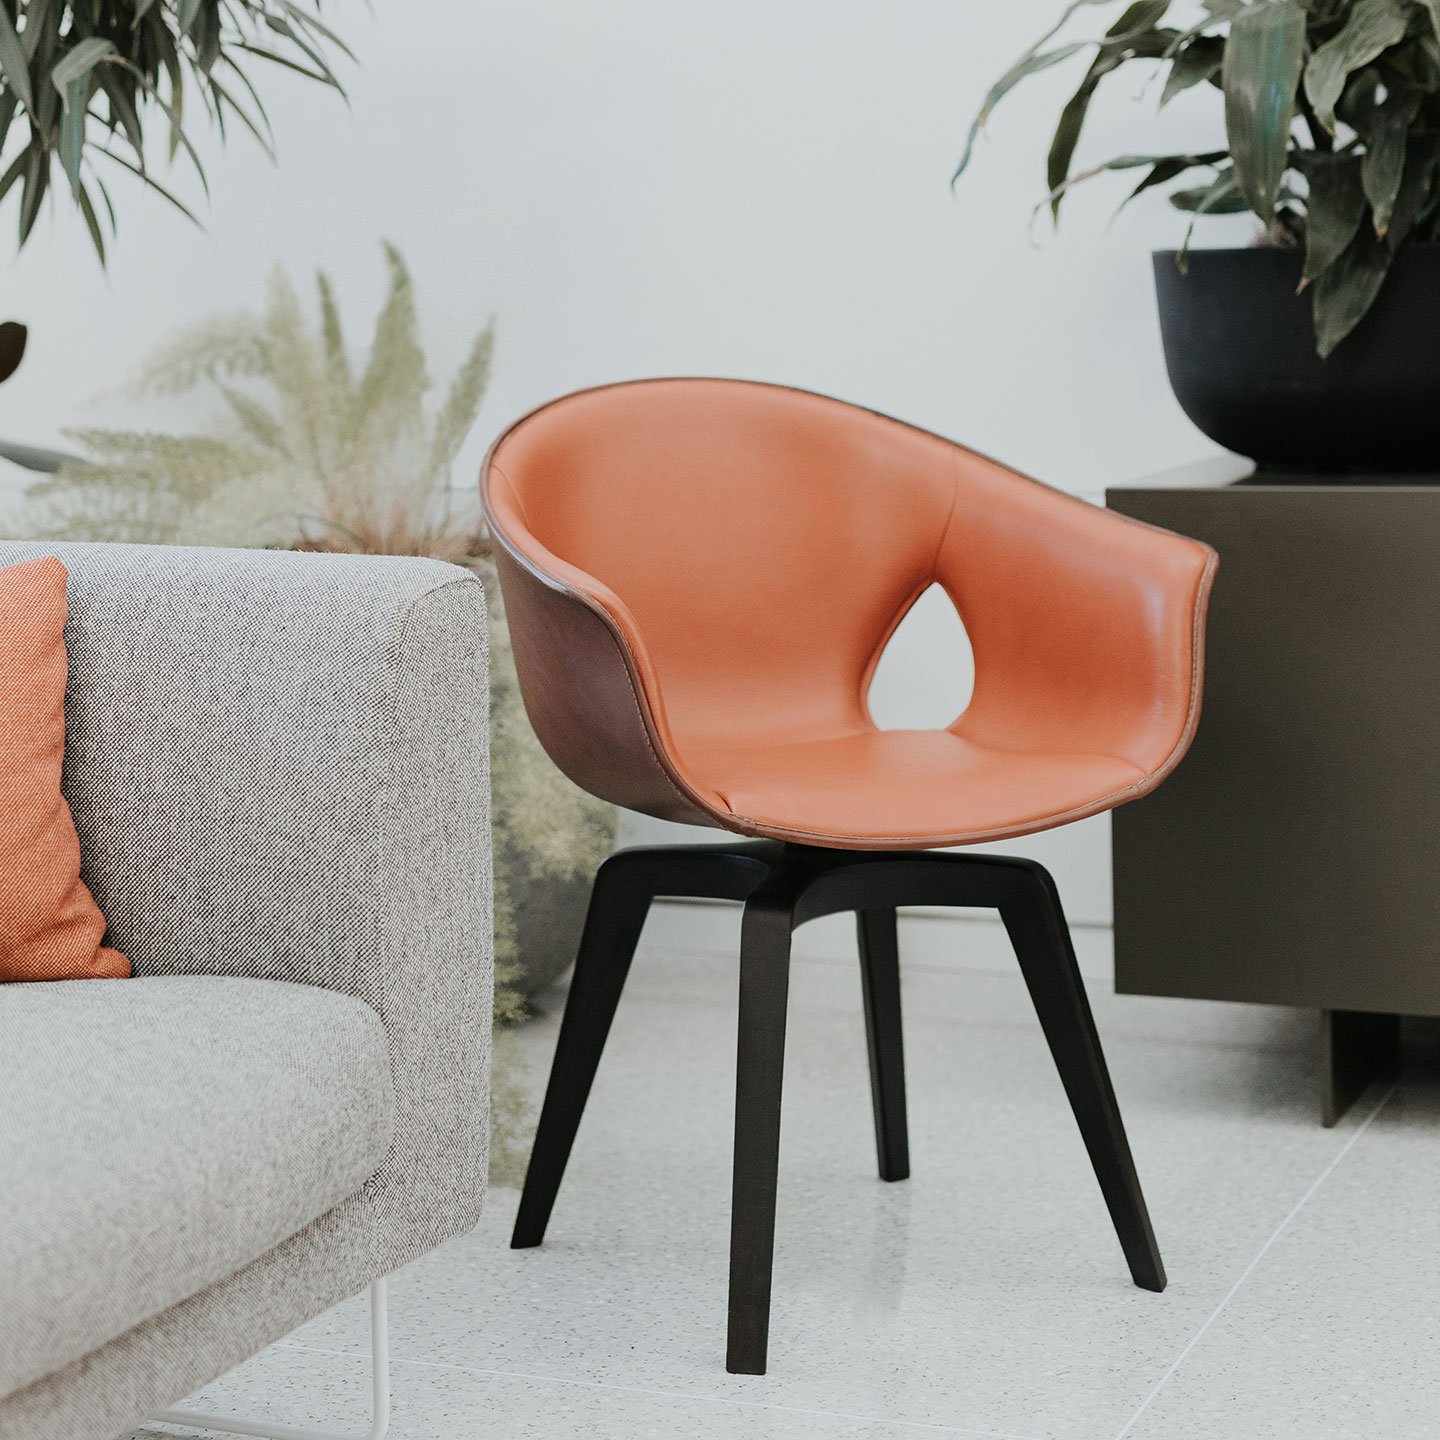 Haworth Ginger chair in orange upholstery and brown exterior in a lounge space